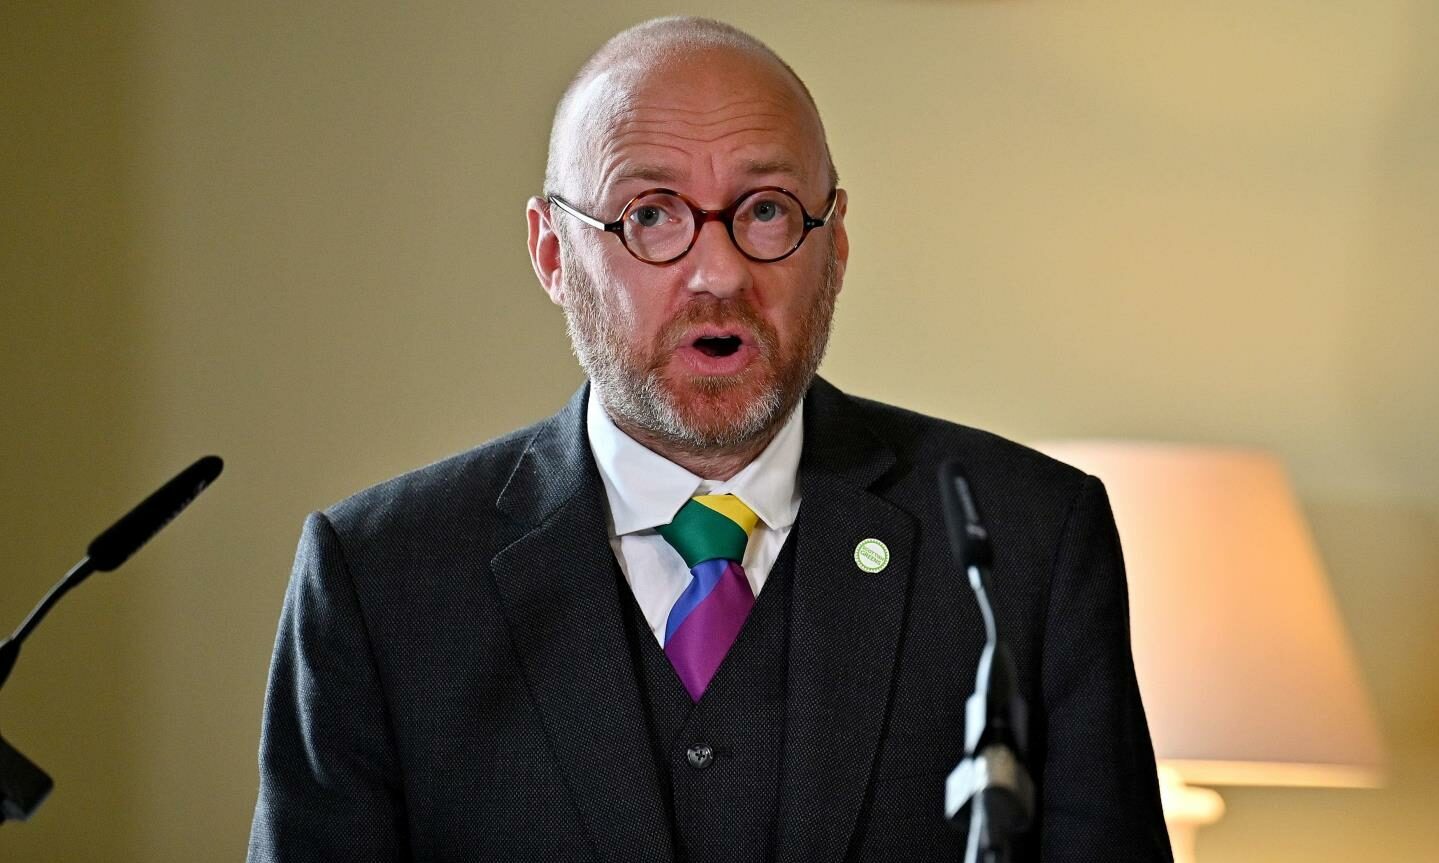 Patrick Harvie appeared alongside the first minister.